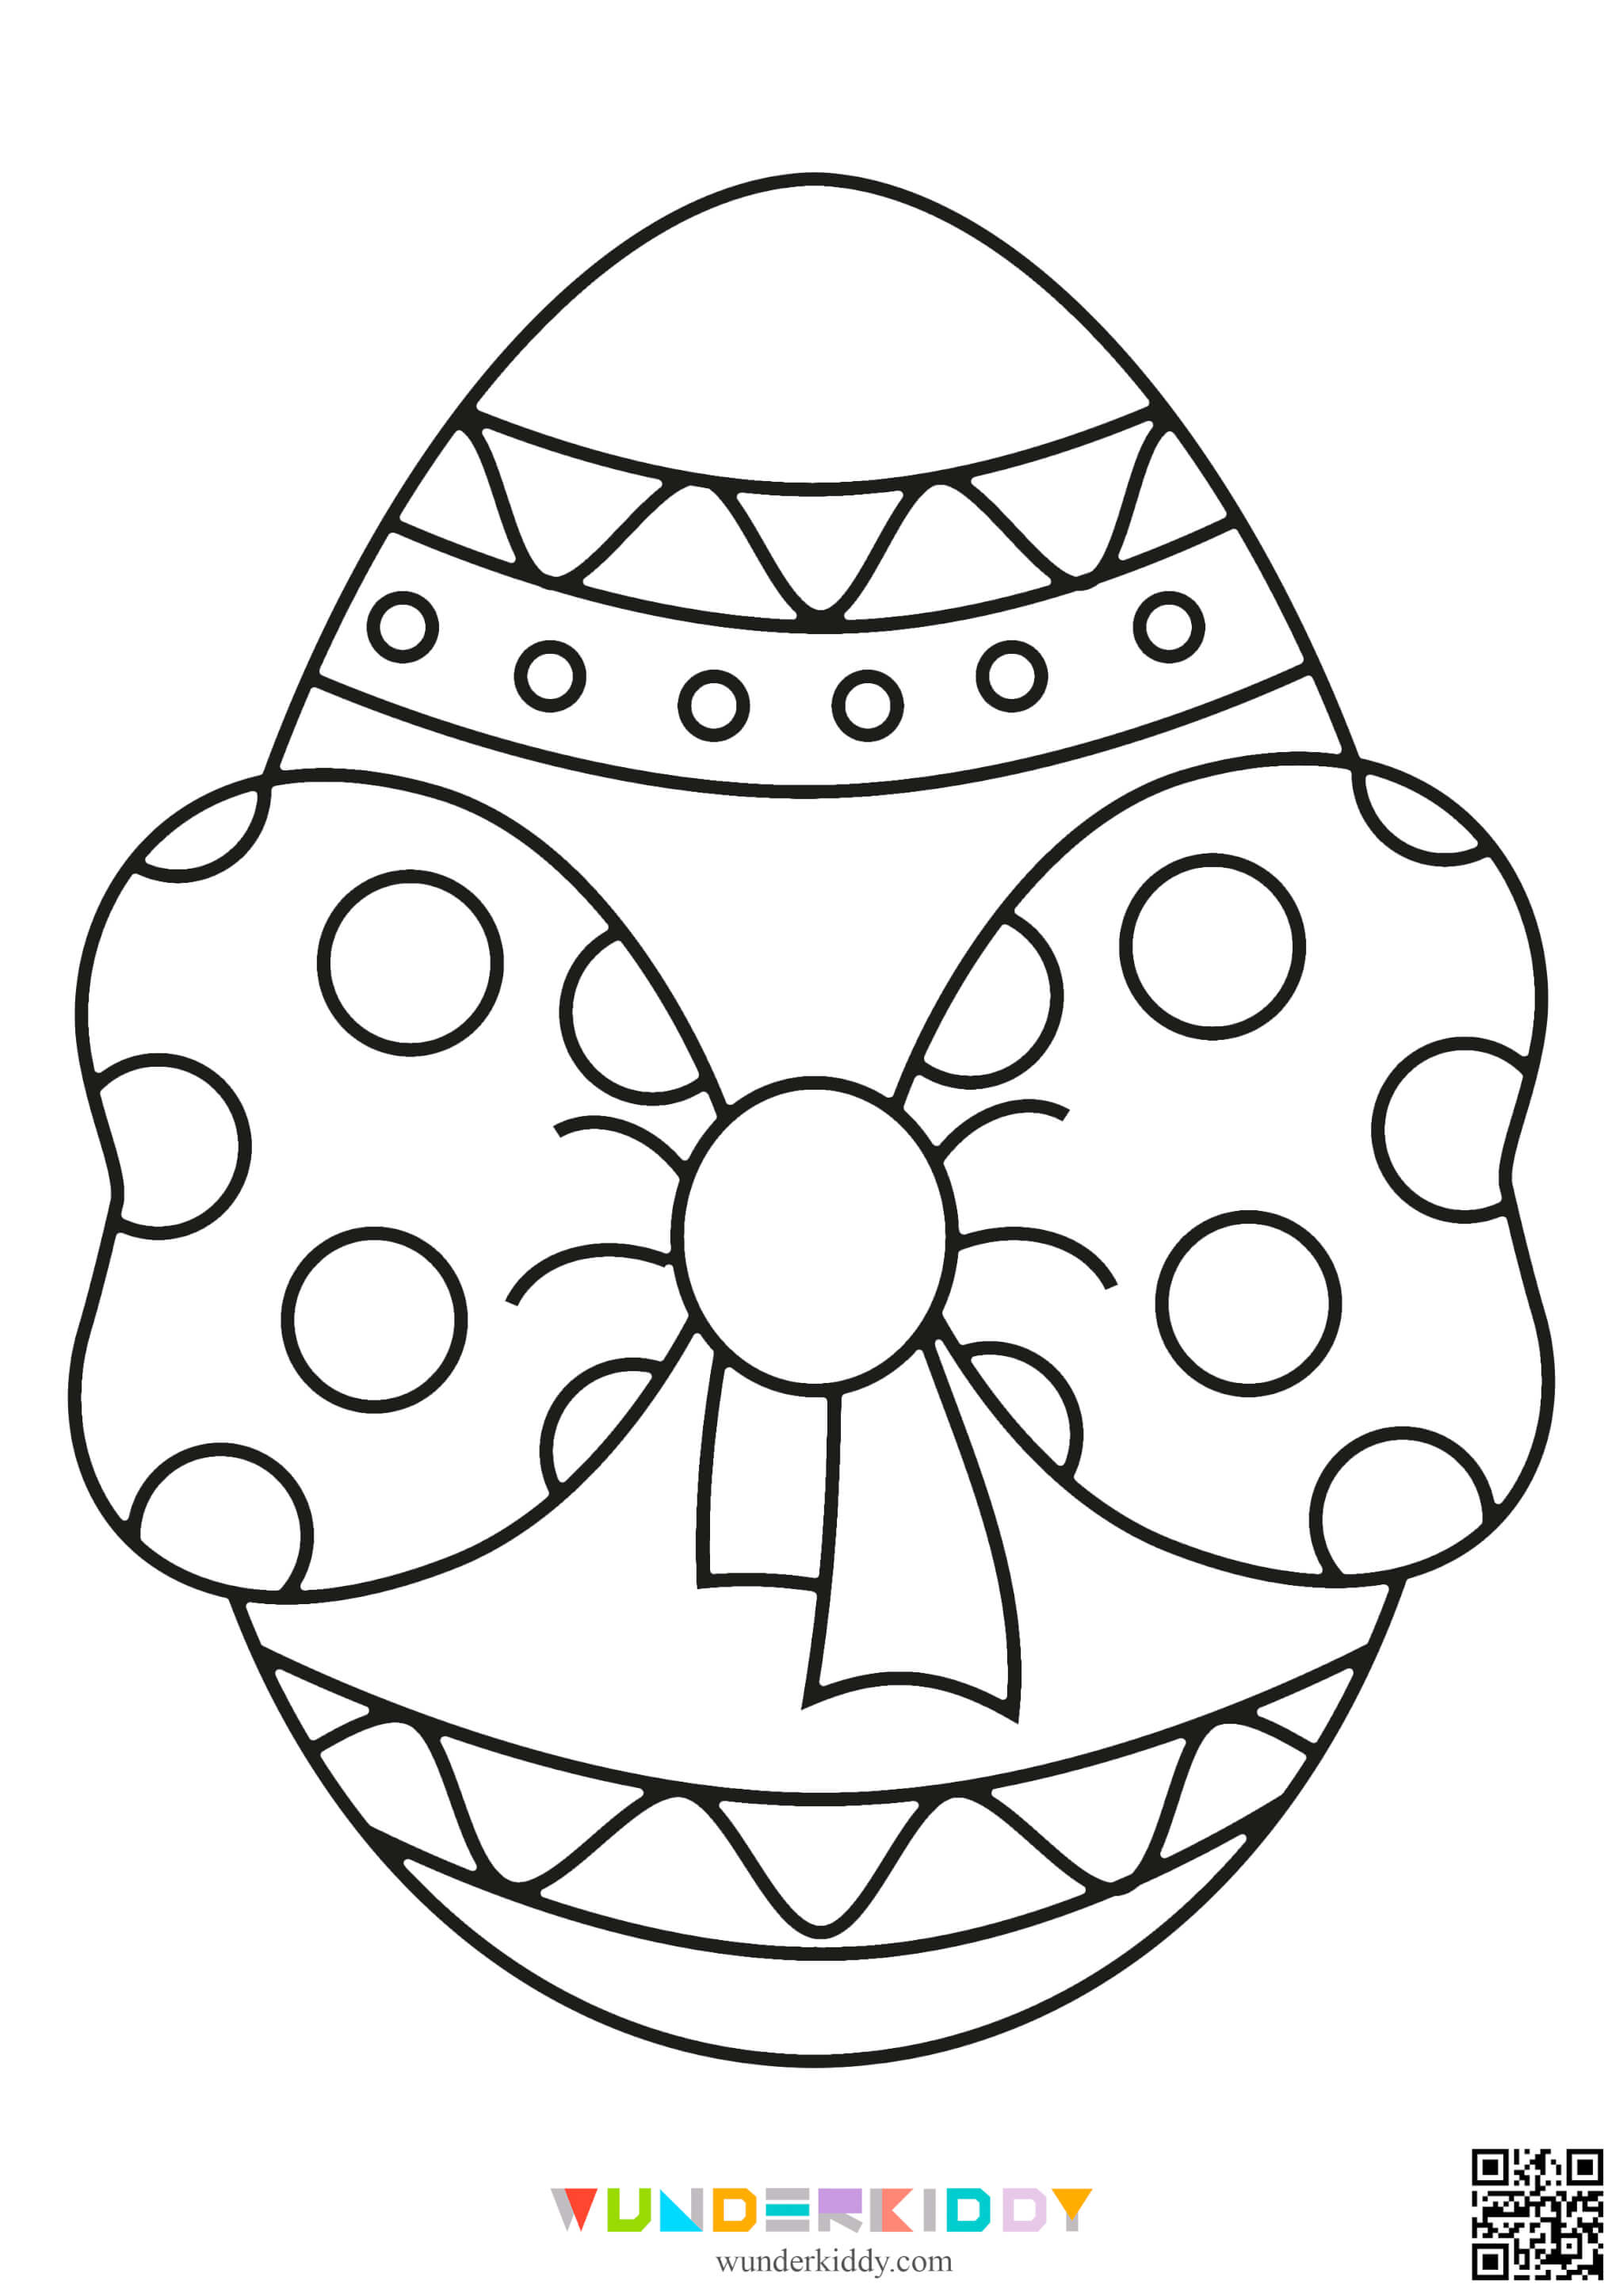 Easter Eggs Coloring Pages - Image 11